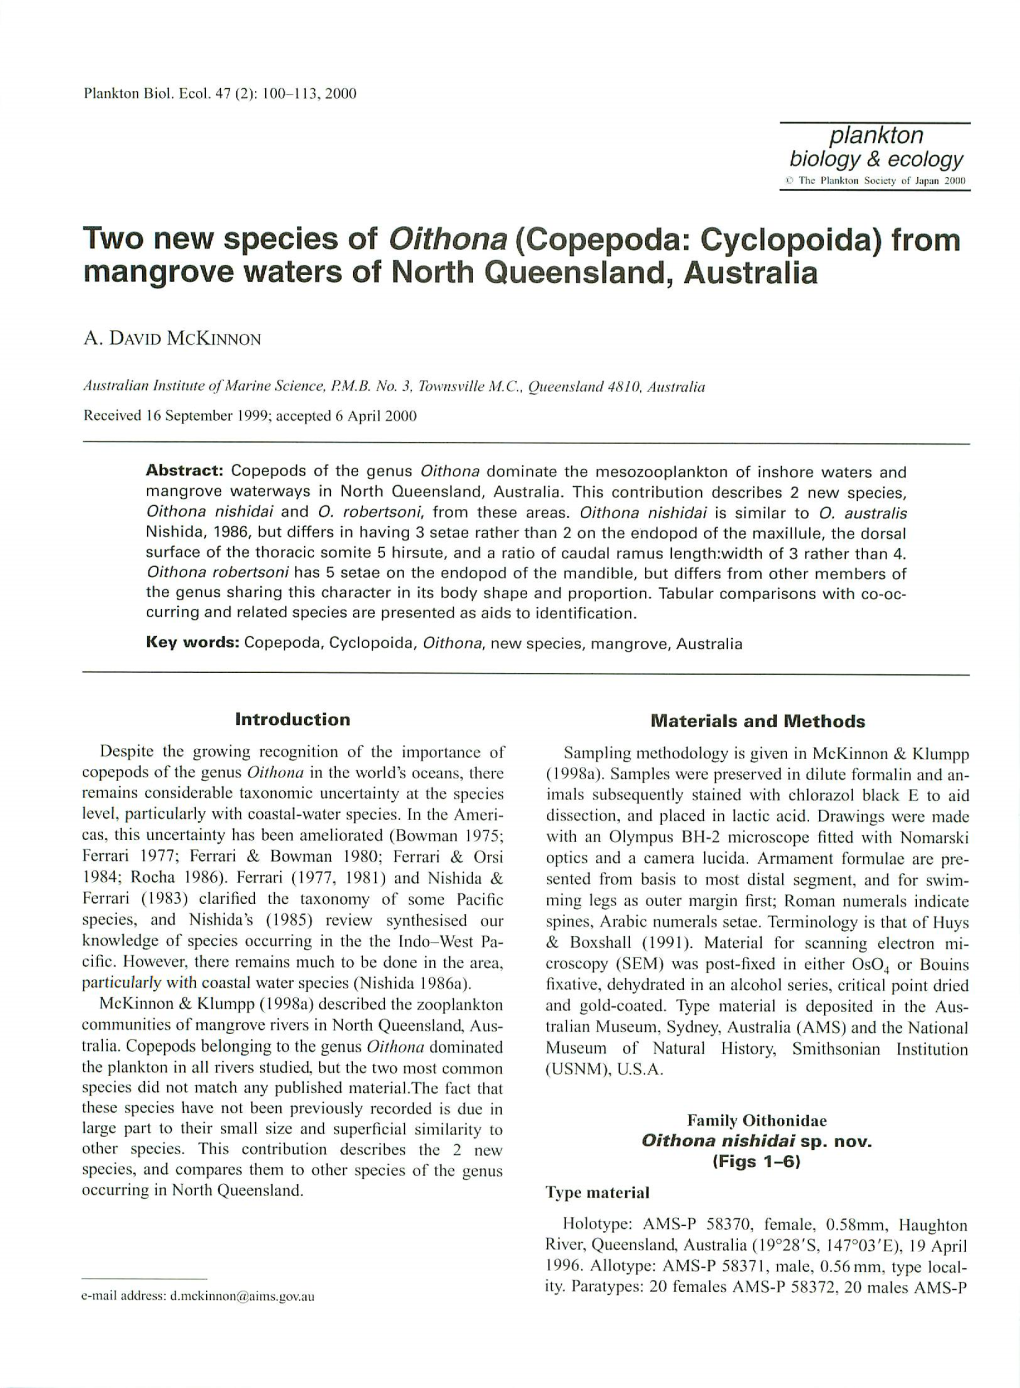 Two New Species of Oithona (Copepoda: Cyclopoida) from Mangrove Waters of North Queensland, Australia